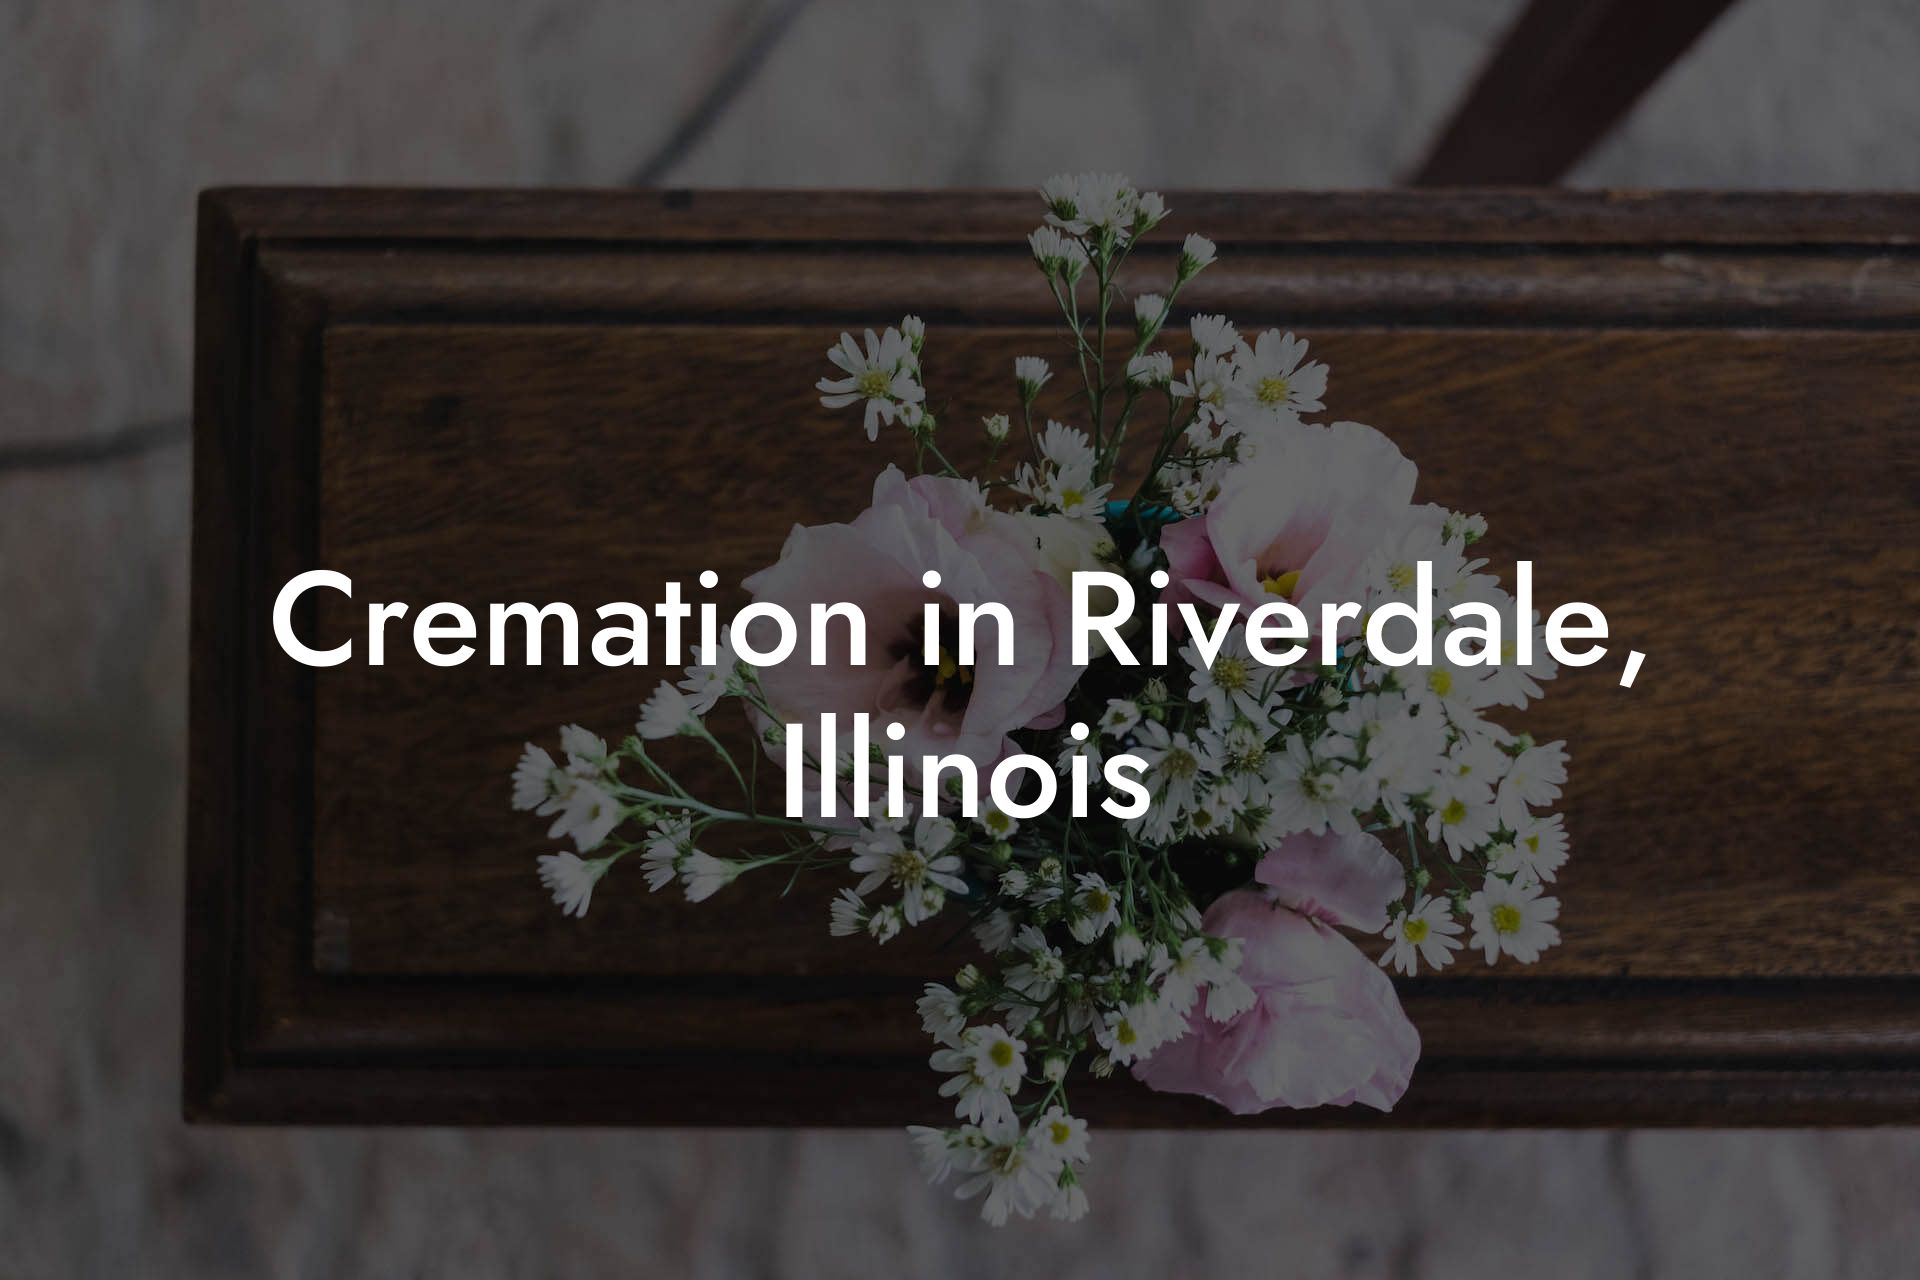 Cremation in Riverdale, Illinois